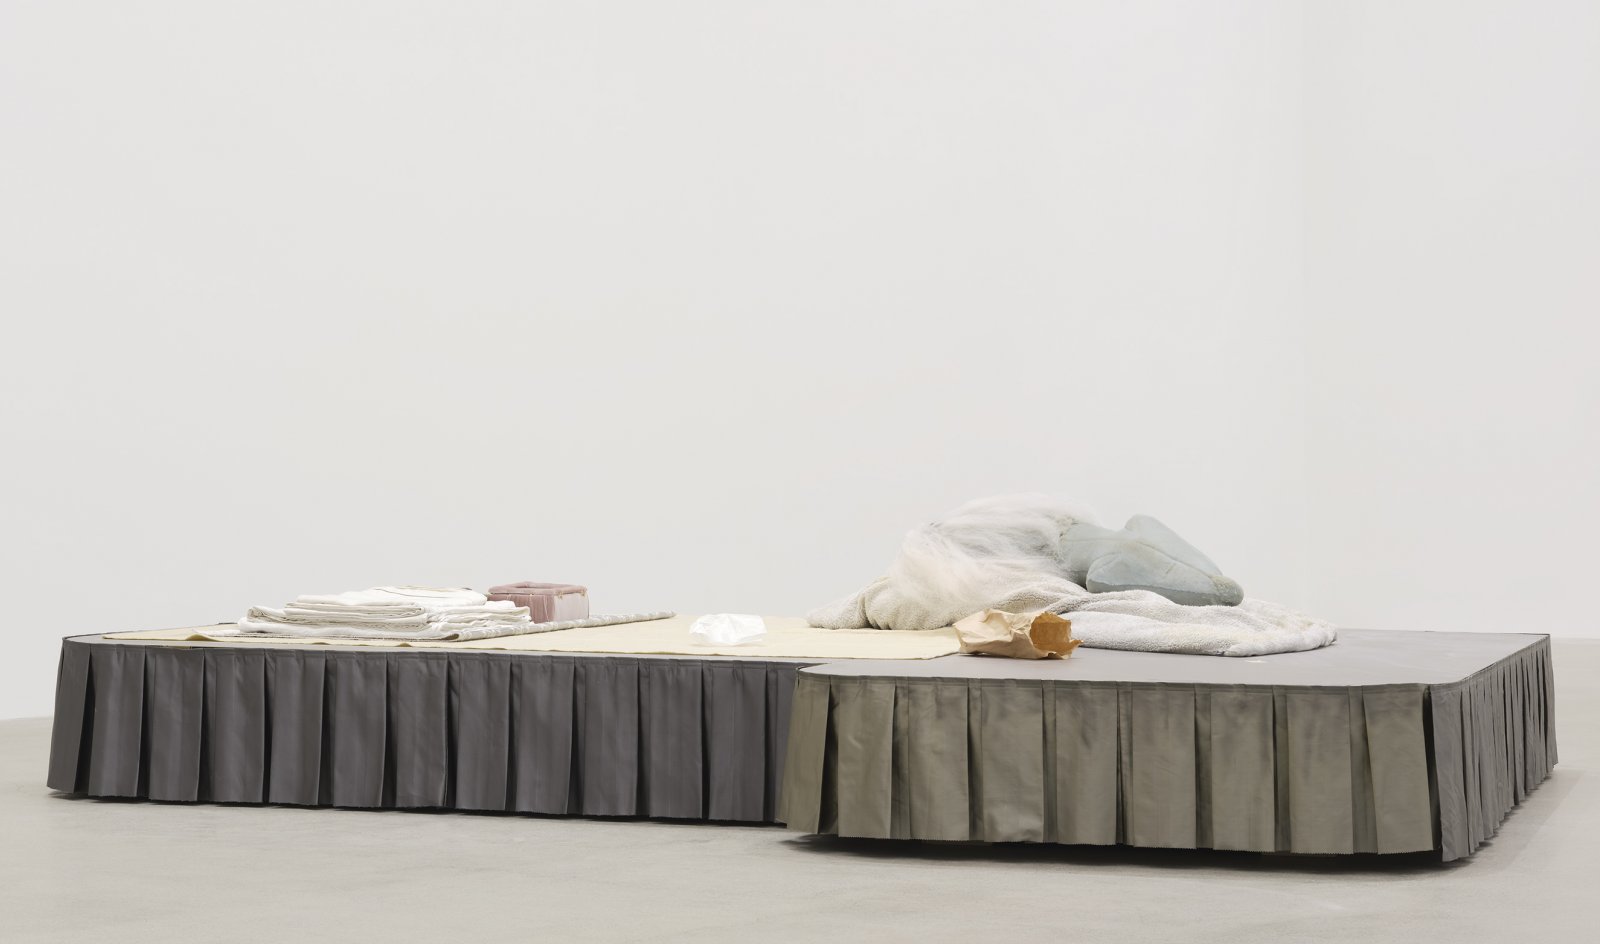 ​Liz Magor, Coiffed, 2020, painted plywood, fabric skirting, silicone rubber, artificial hair, acrylic throw, woollen blankets, silver fabric, linen, jewellery boxes, costume jewellery, packaging materials, 27 x 132 x 96 in. (69 x 335 x 244 cm) by Liz Magor